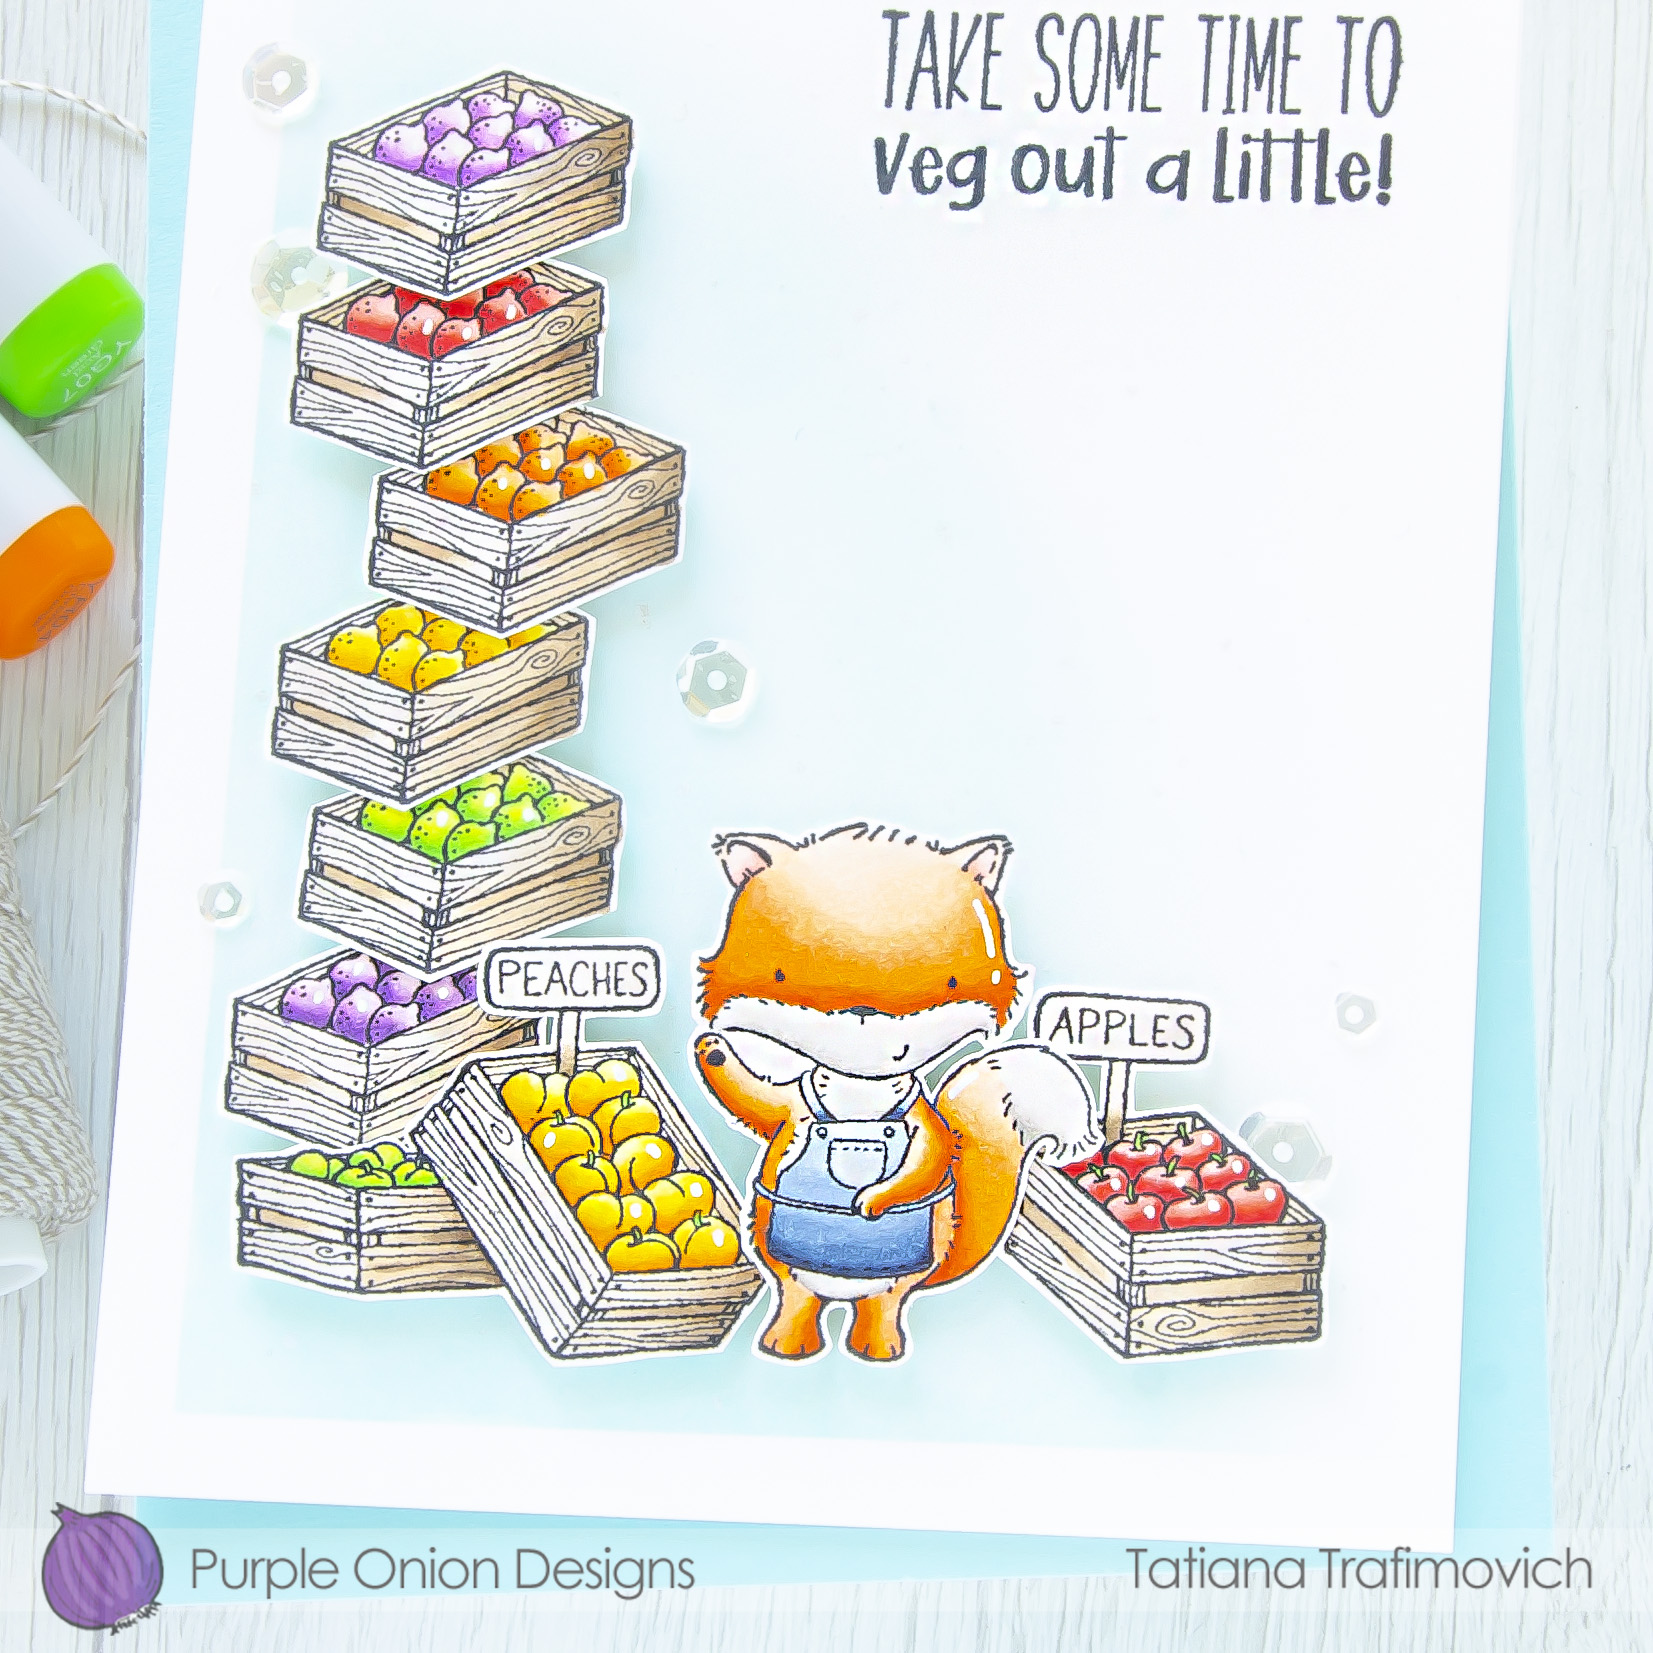 Take Some Time To Veg Out A Little #handmade card by Tatiana Trafimovich #tatianacraftandart - stamps by Purple Onion Designs